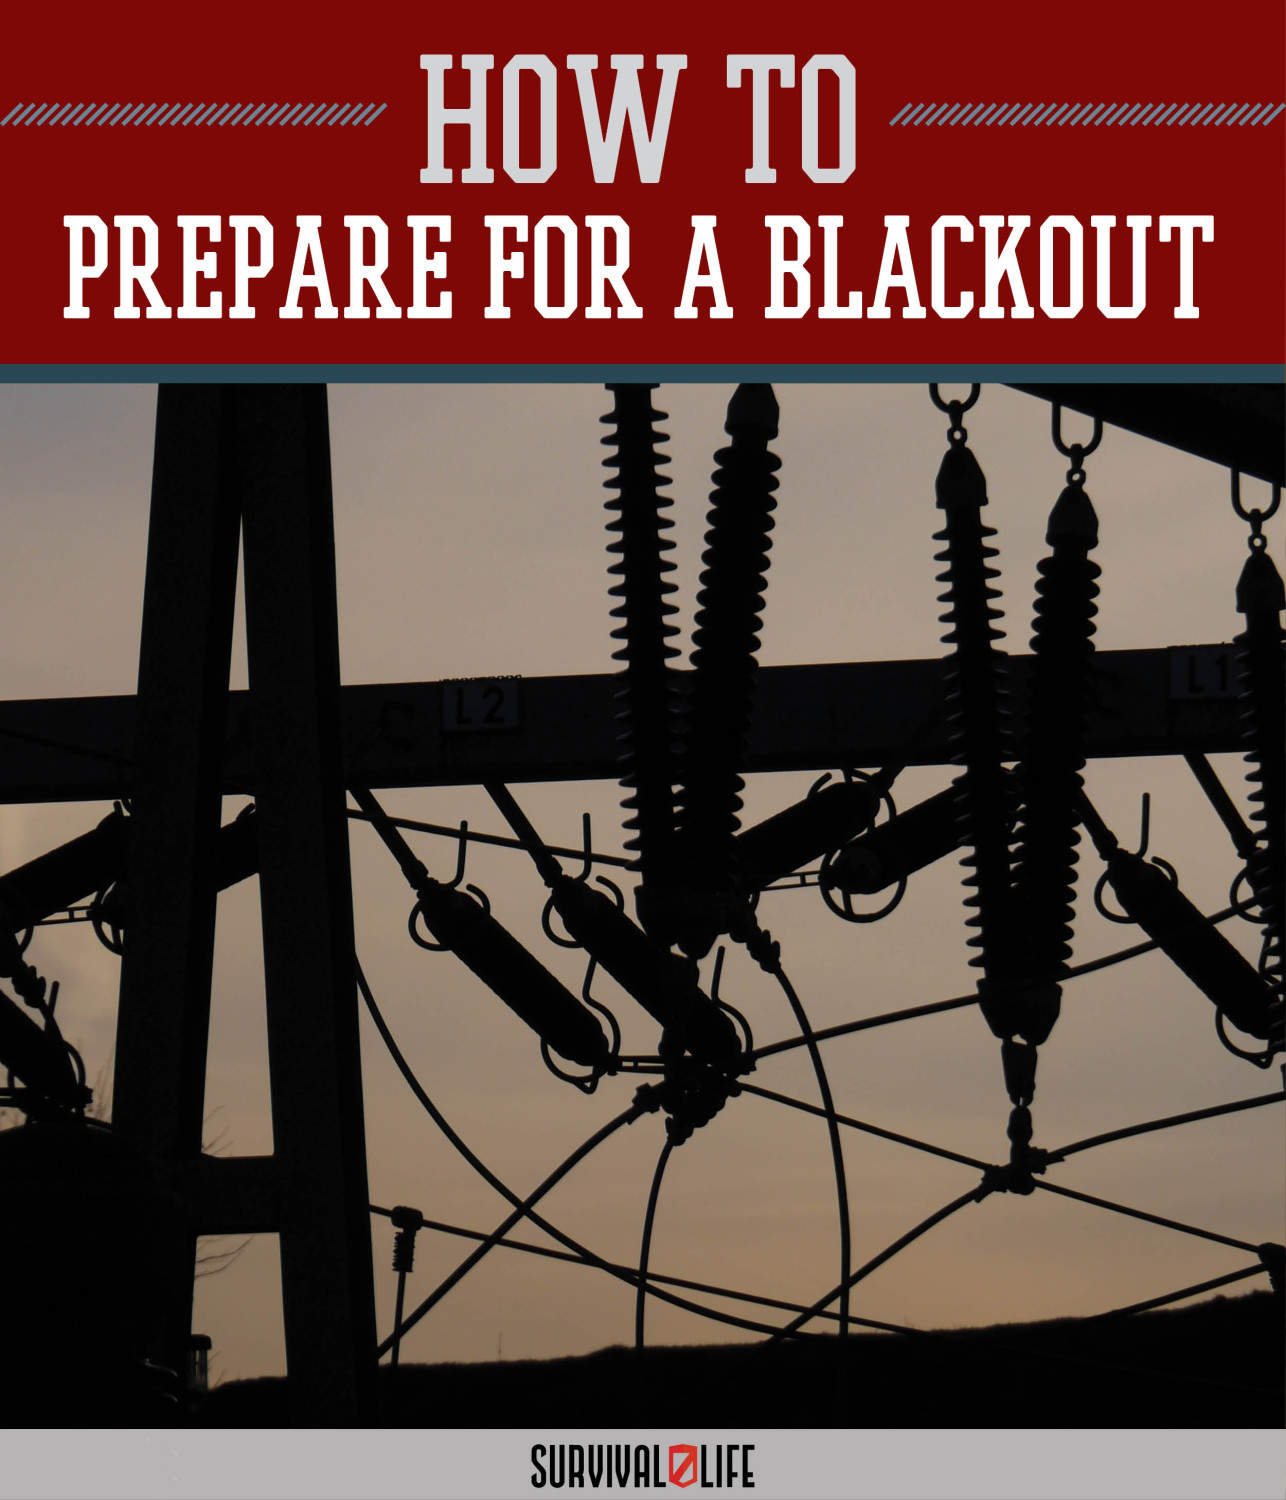 Blackout: How Did This City's Lights Stay On? by Survival Life at http://survivallife.com/2015/05/06/blackout-lights-stayed-on/